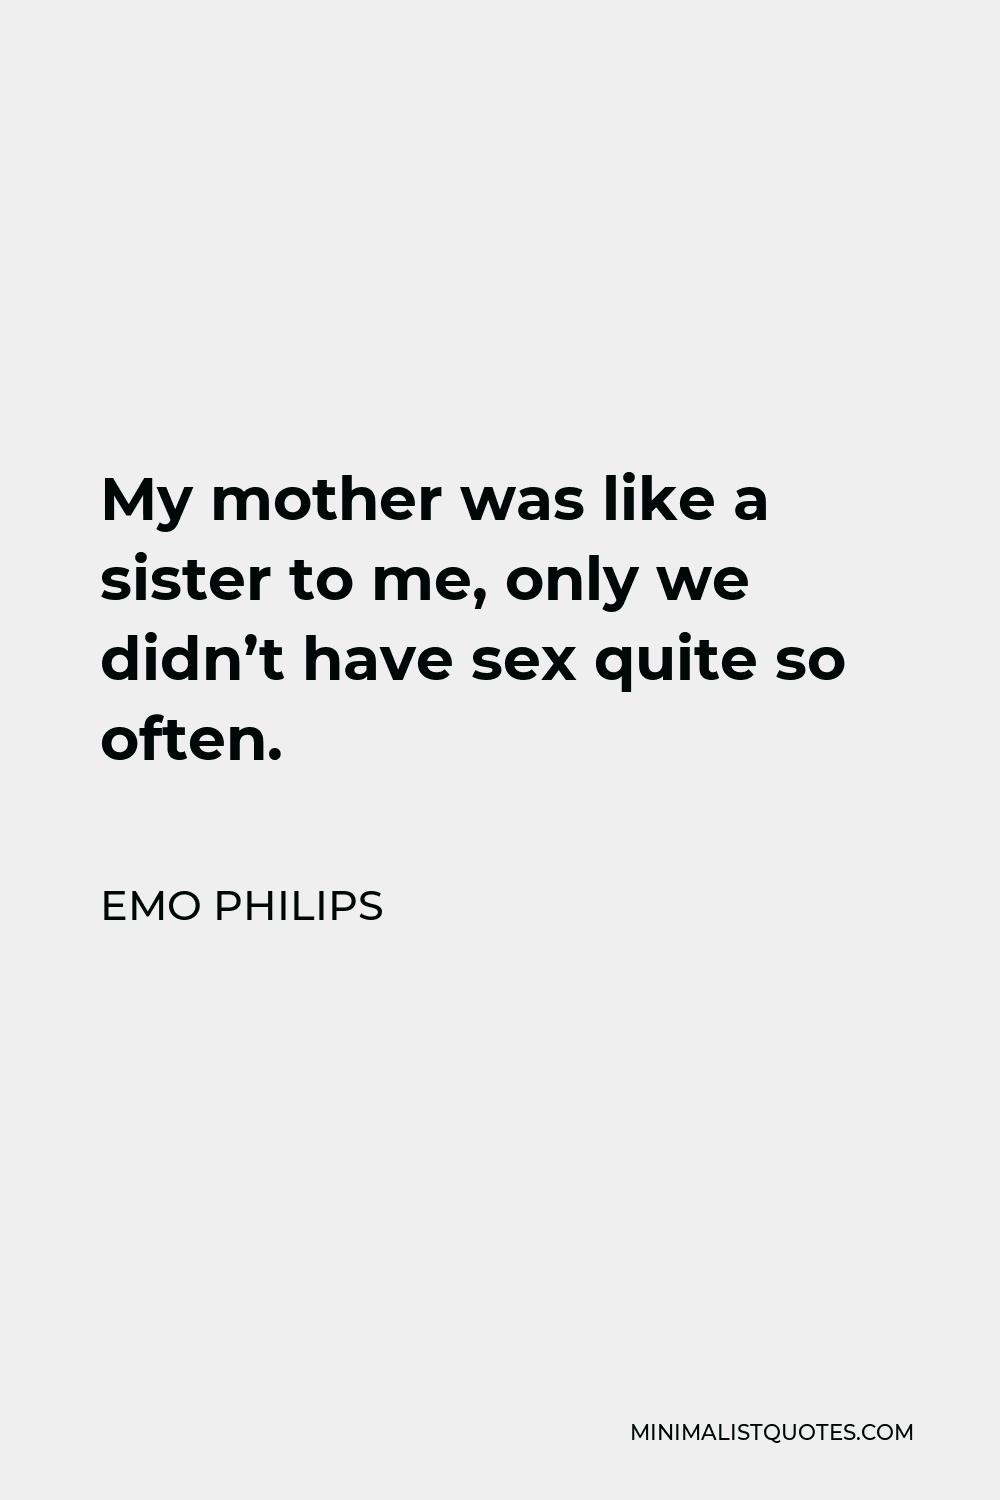 Emo Philips Quote - My mother was like a sister to me, only we didn’t have sex quite so often.